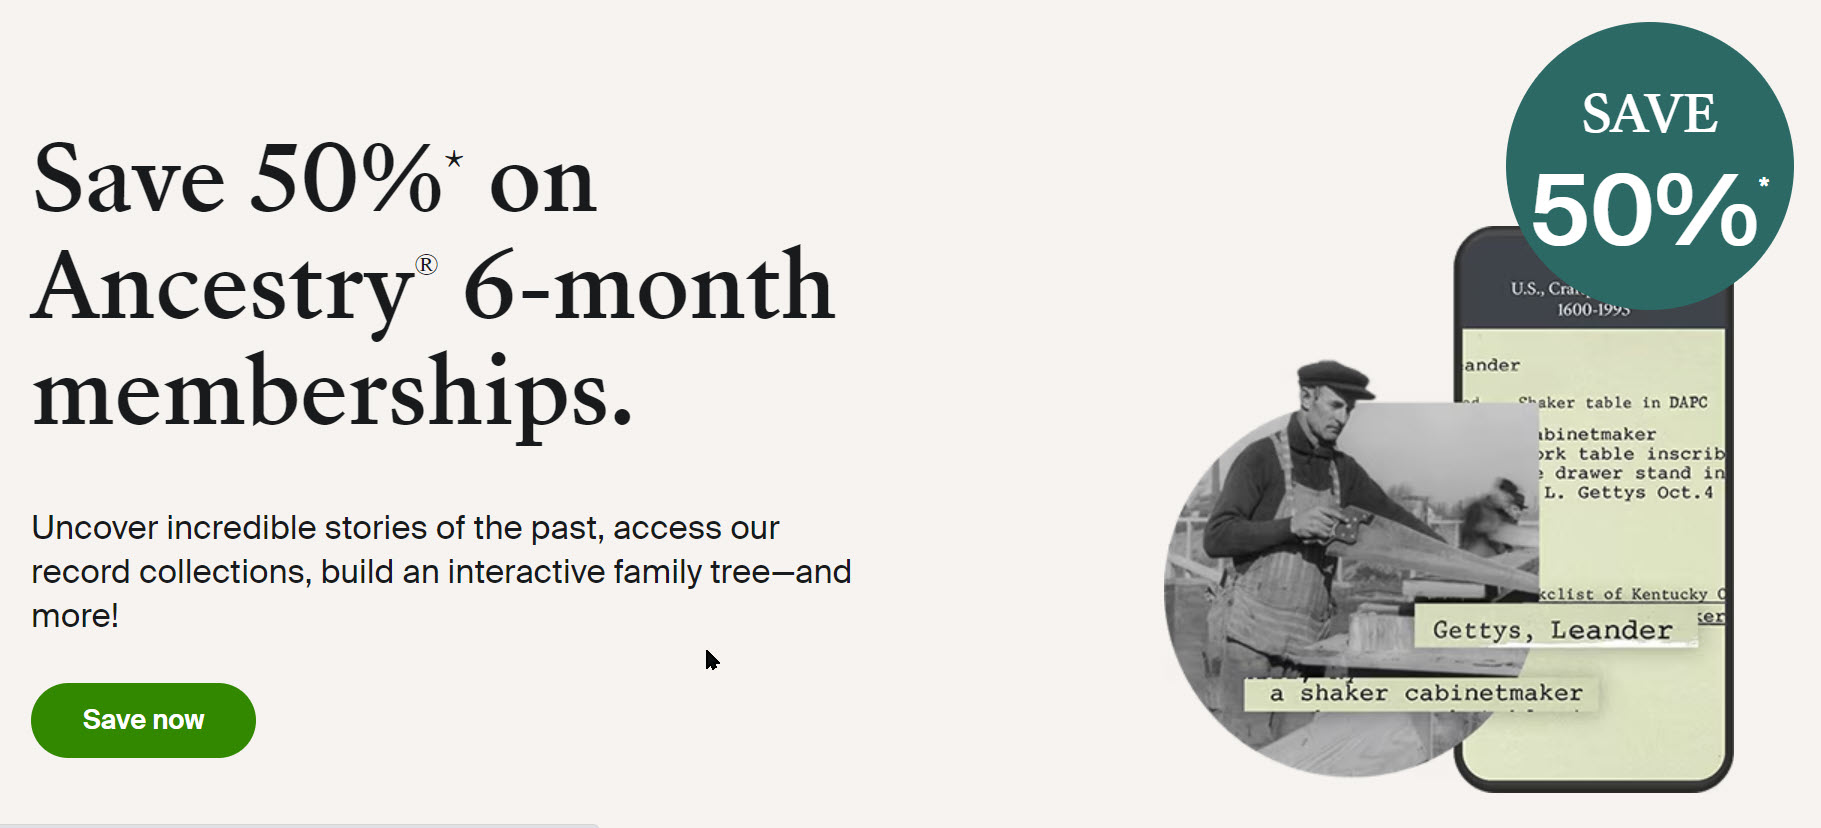 Save 50 Percent on Ancestry: All 6-month memberships now on sale!